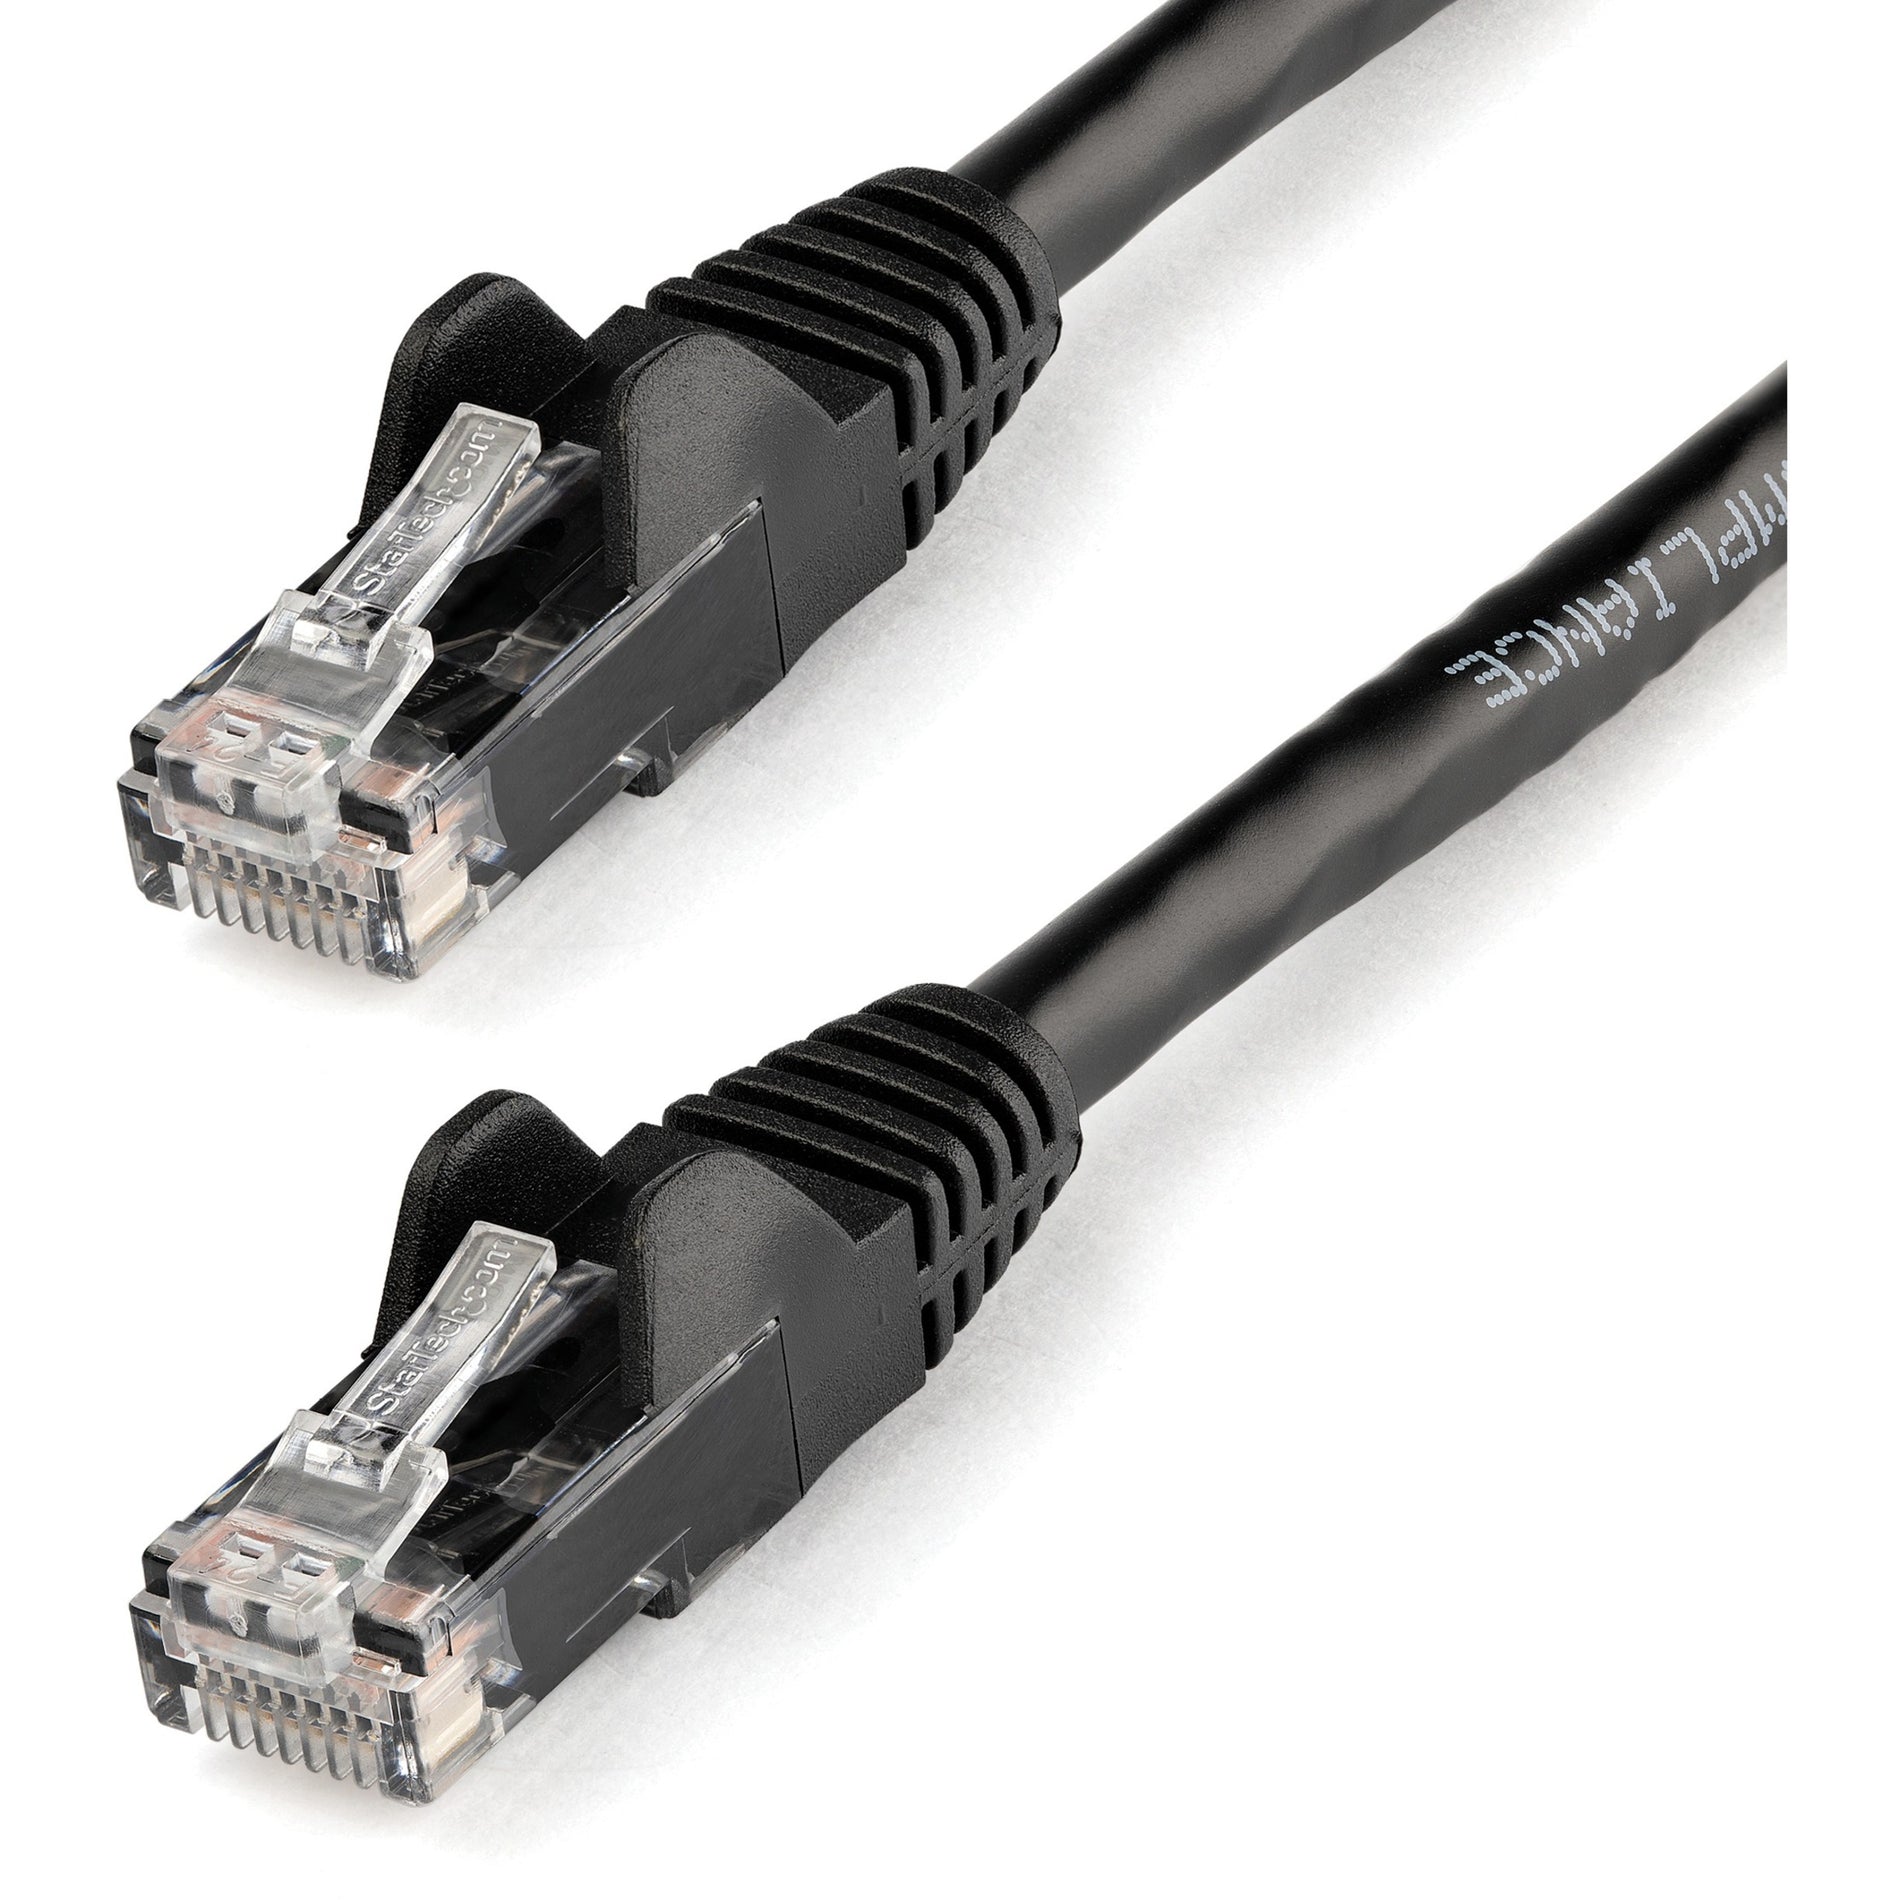 StarTech.com N6PATCH25BK 25 ft Black Snagless Cat6 UTP Patch Cable, Molded, 10 Gbit/s, Gold Plated Connectors